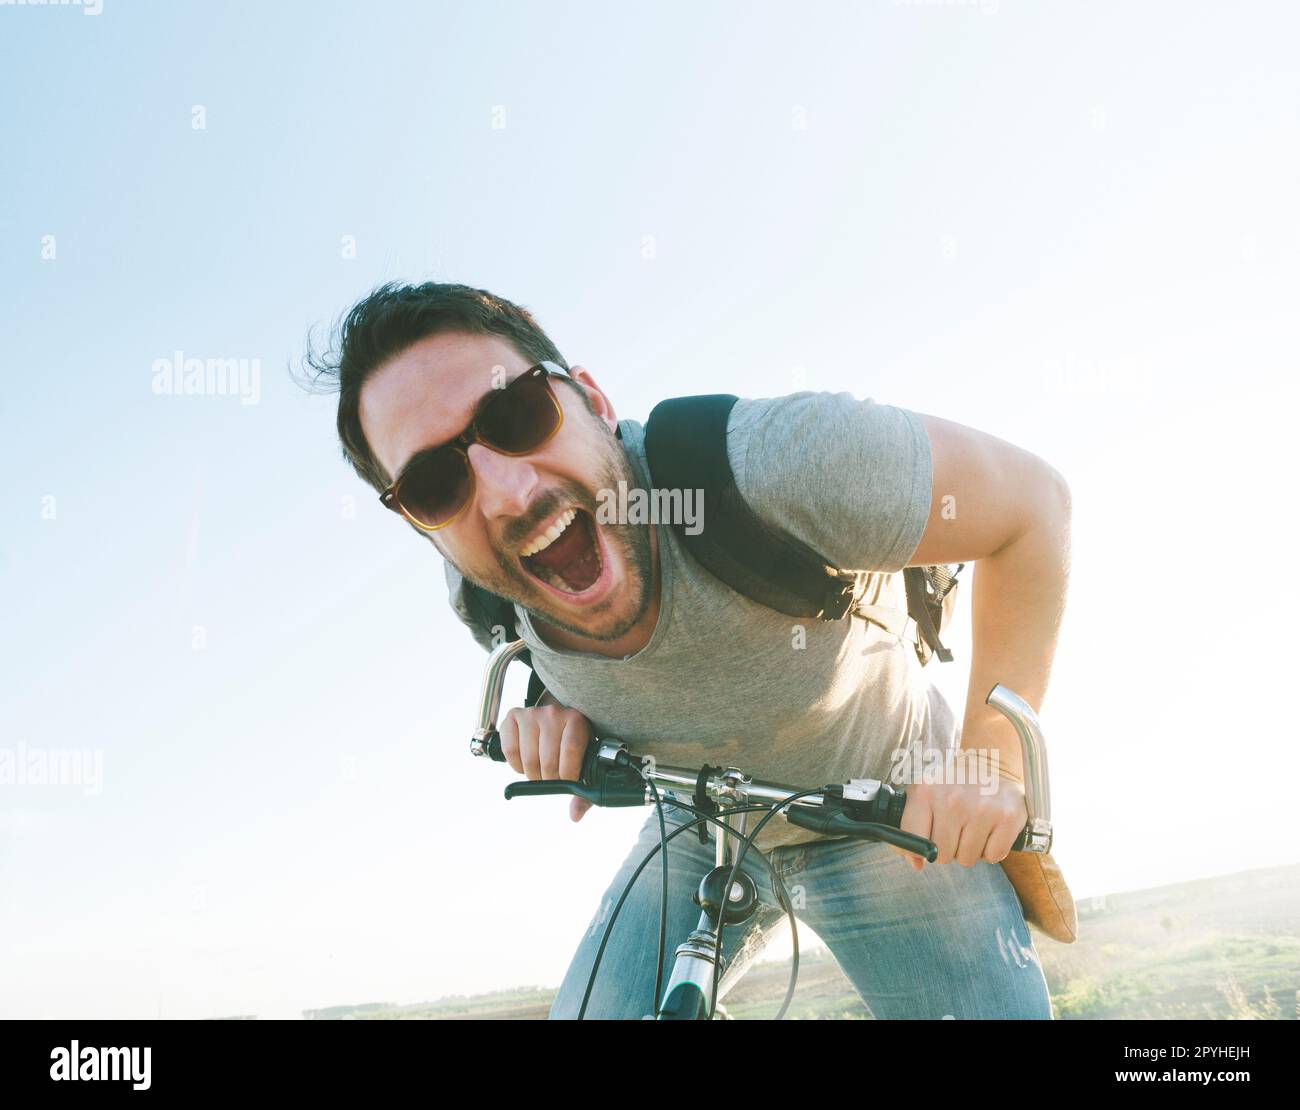 Active sport man with excited face expression exploring and traveling by mountain bike on the road. Vintage film filter style image. Stock Photo